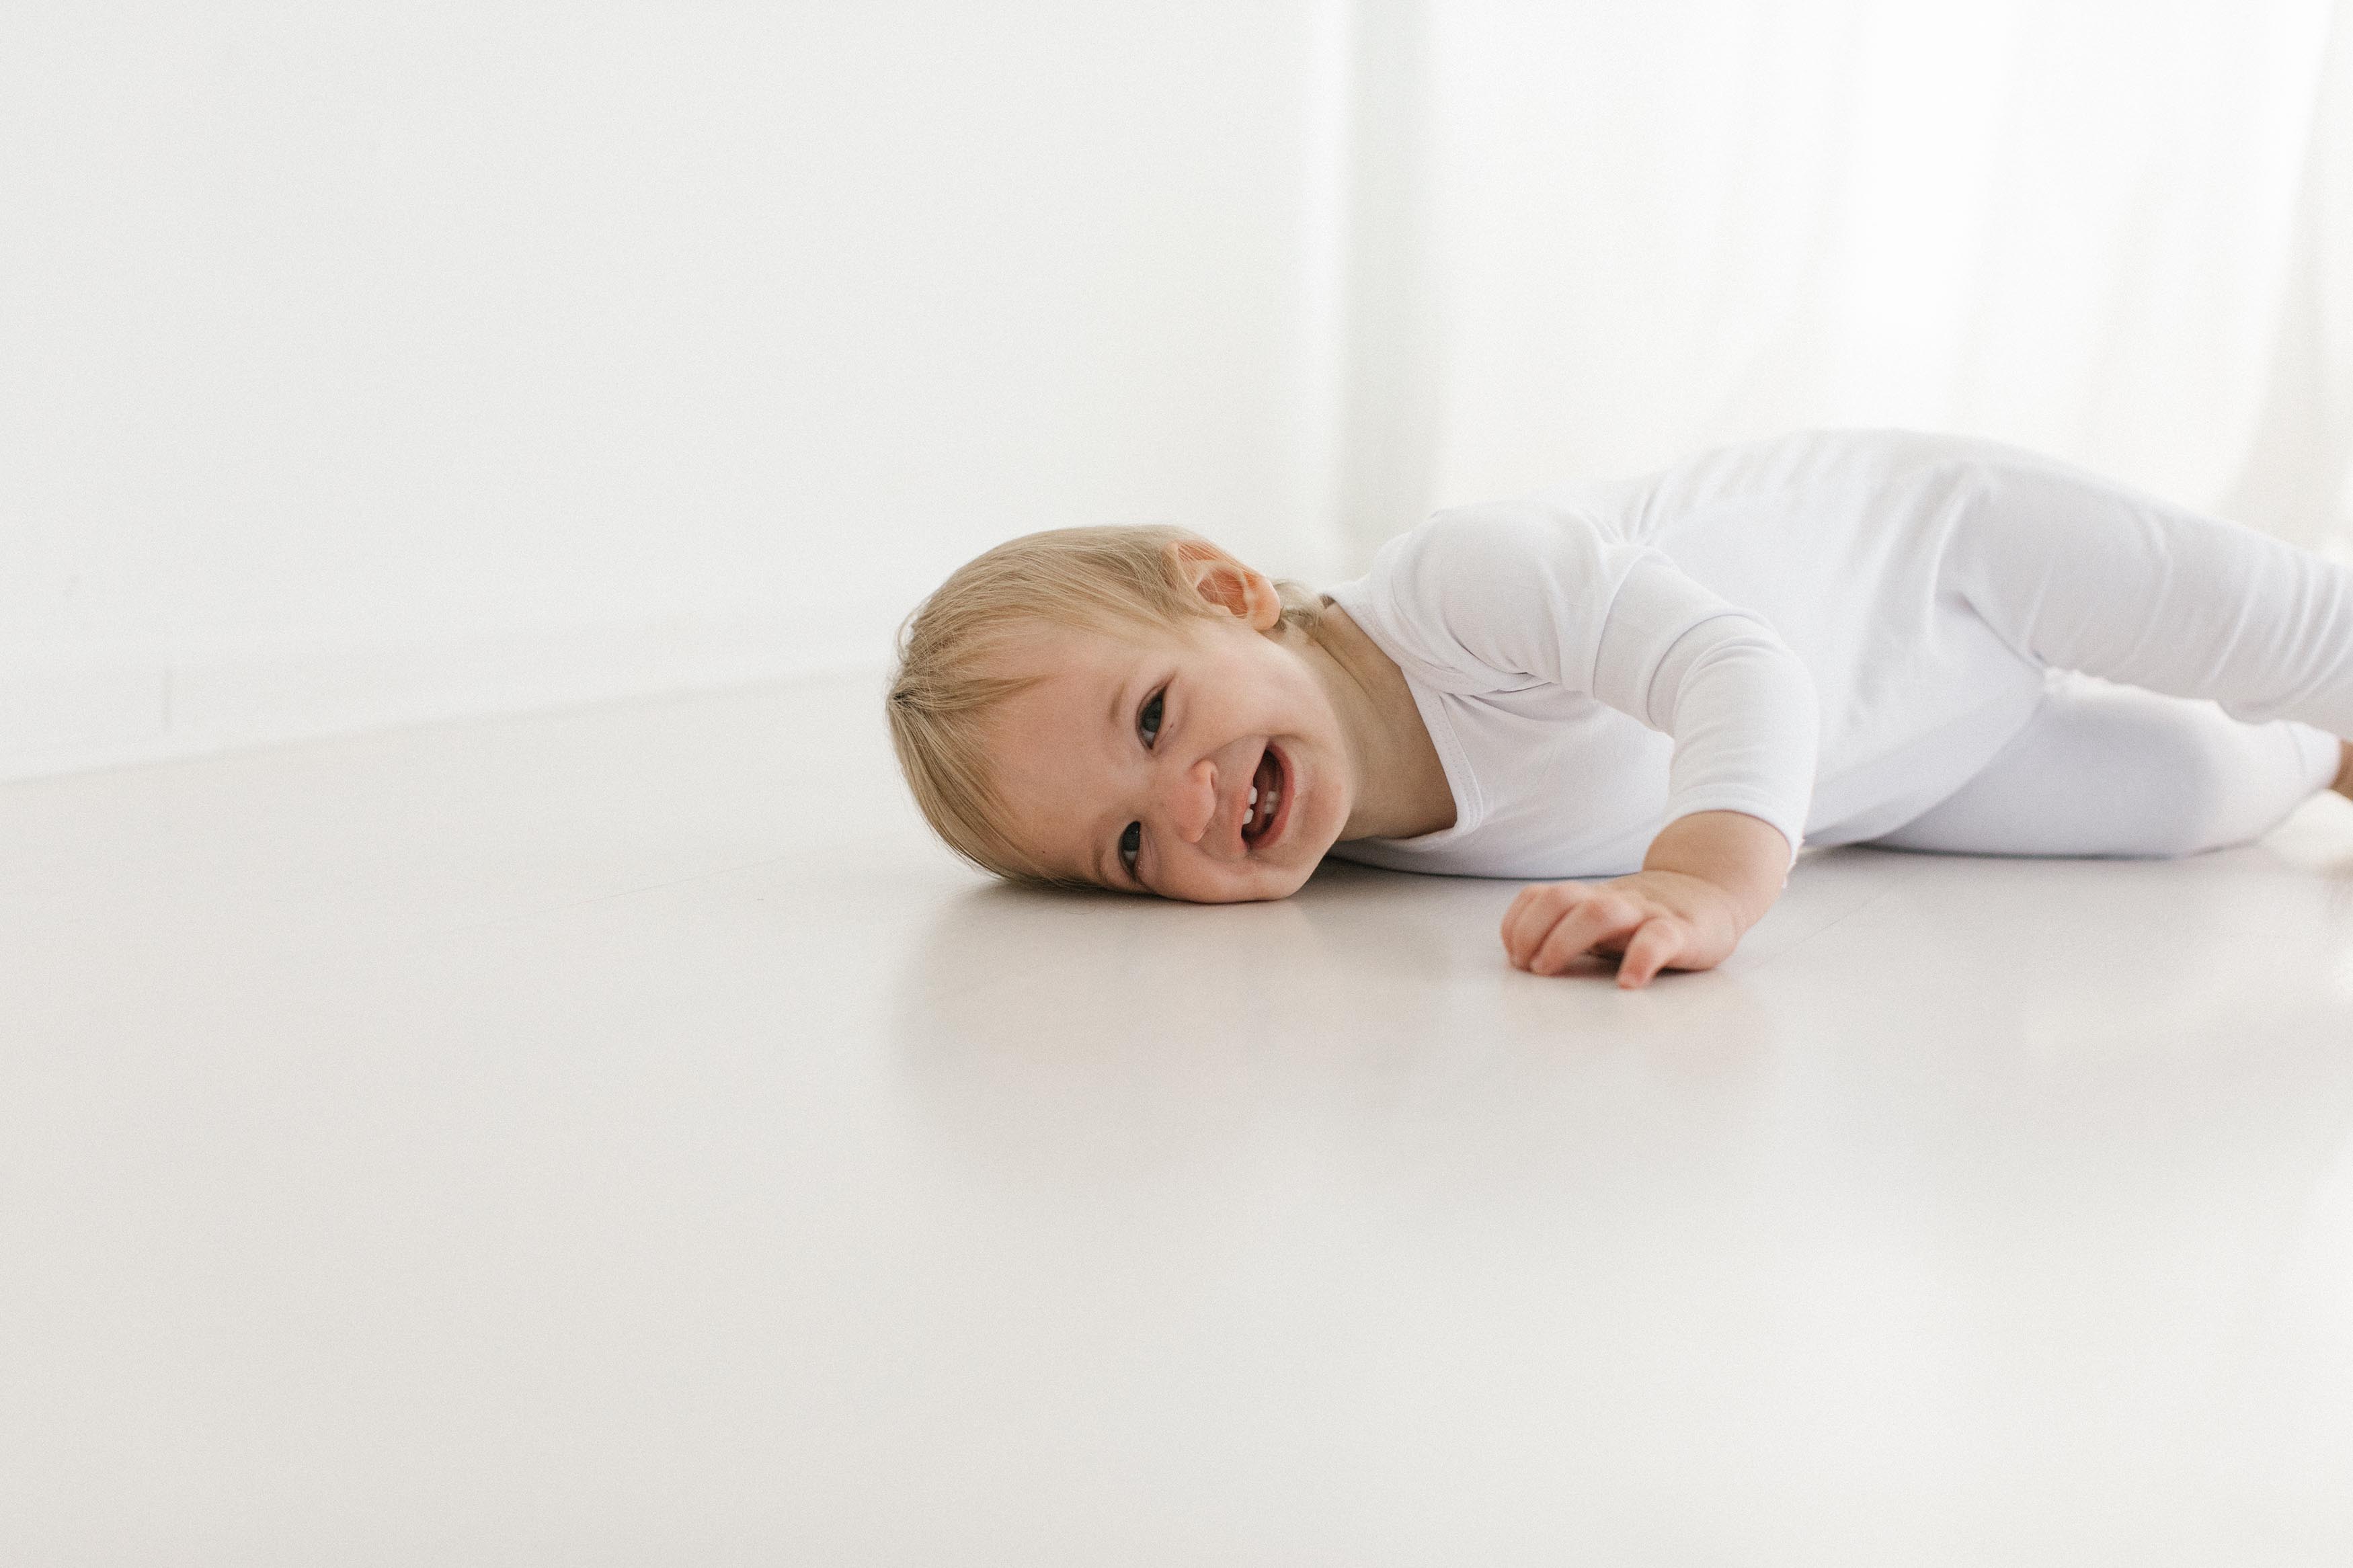 Elle Baker Photography captures baby in white studio with white outfit on